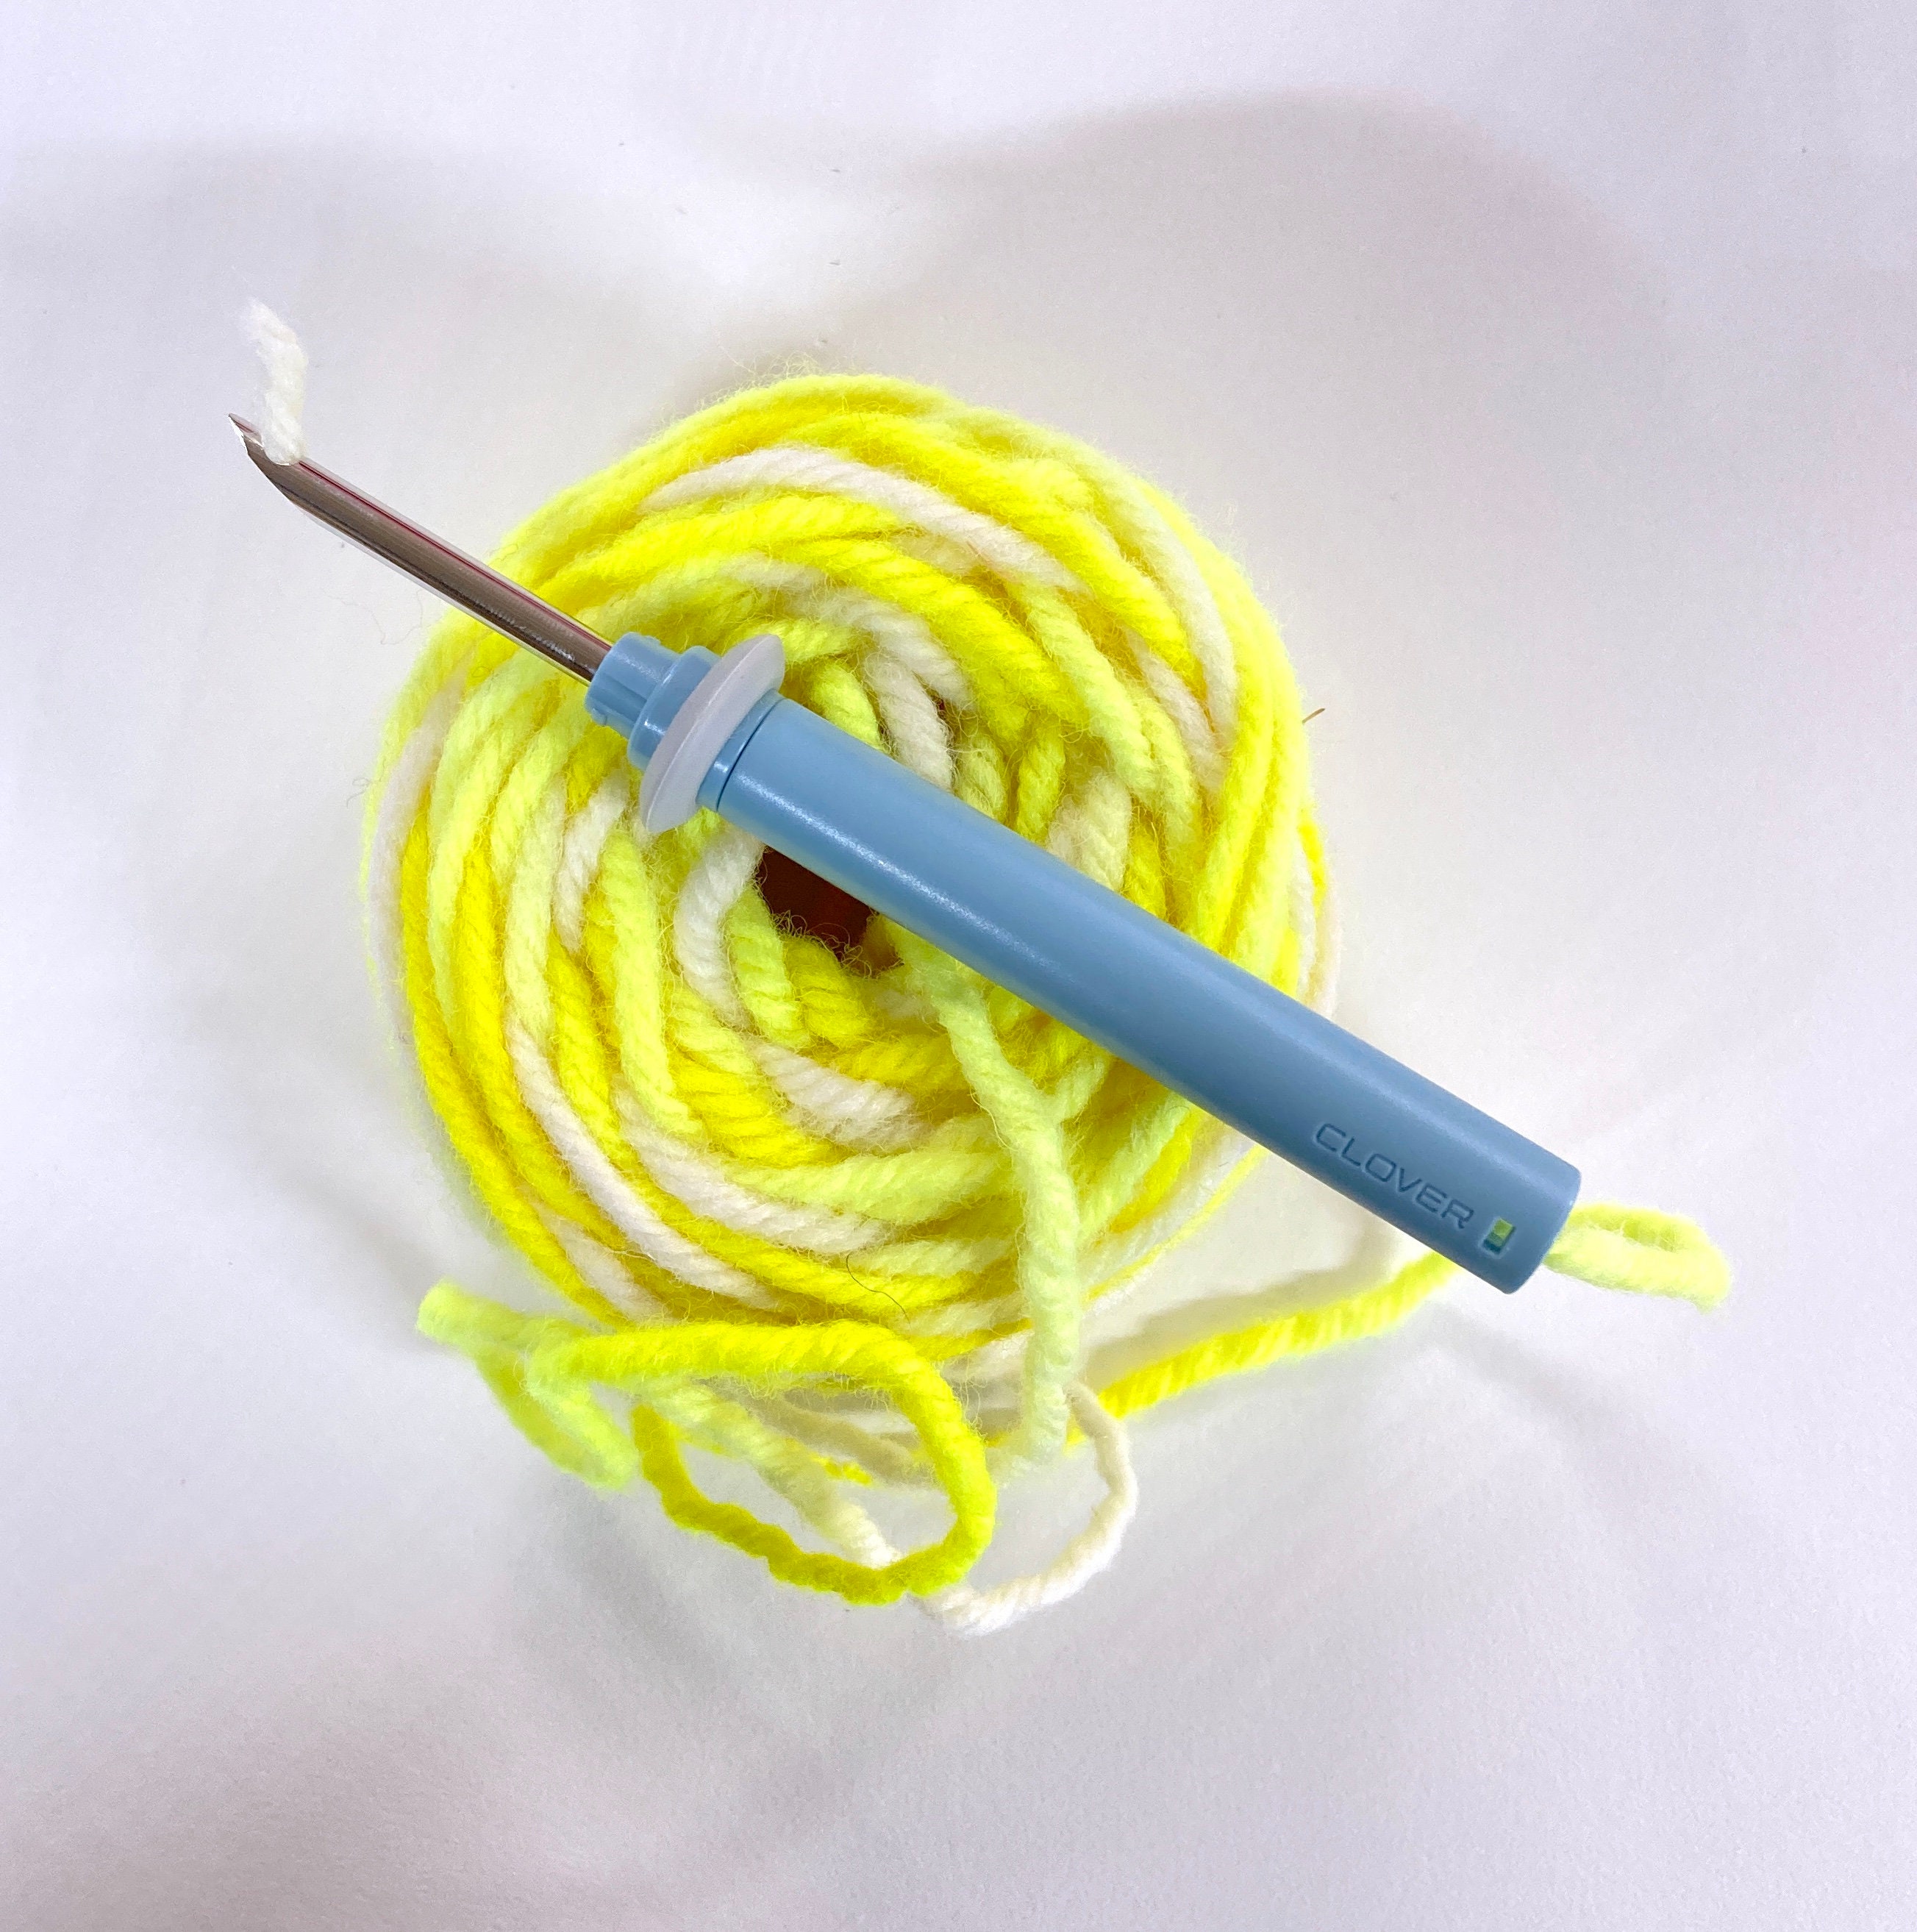 Punching Needle with Clover's Embroidery Stitching Tool – Home